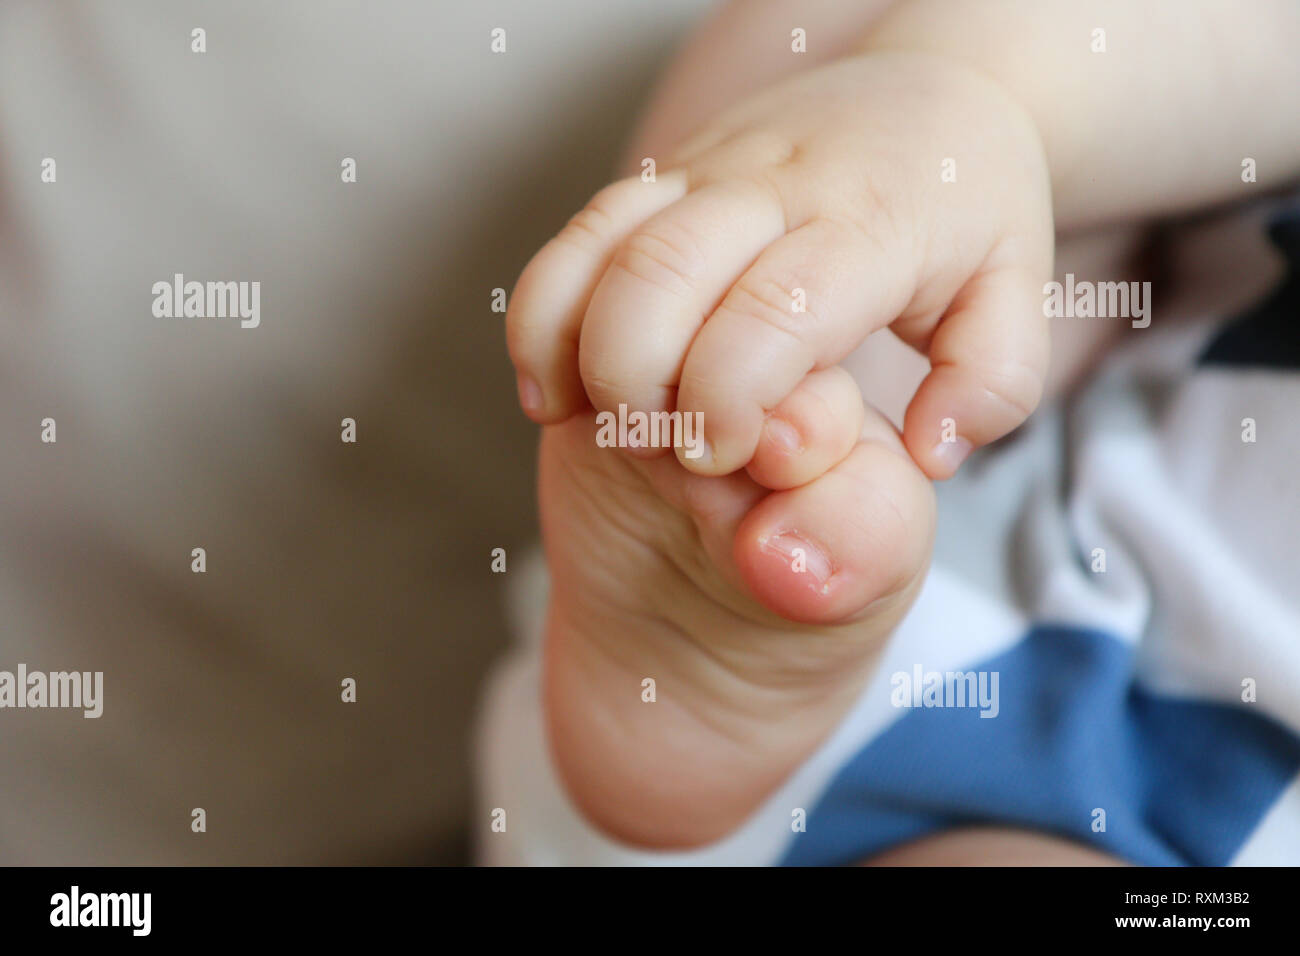 A detail picture of child´s hands and feet. The child is holding its feet and exploring its body and training its skills. Stock Photo